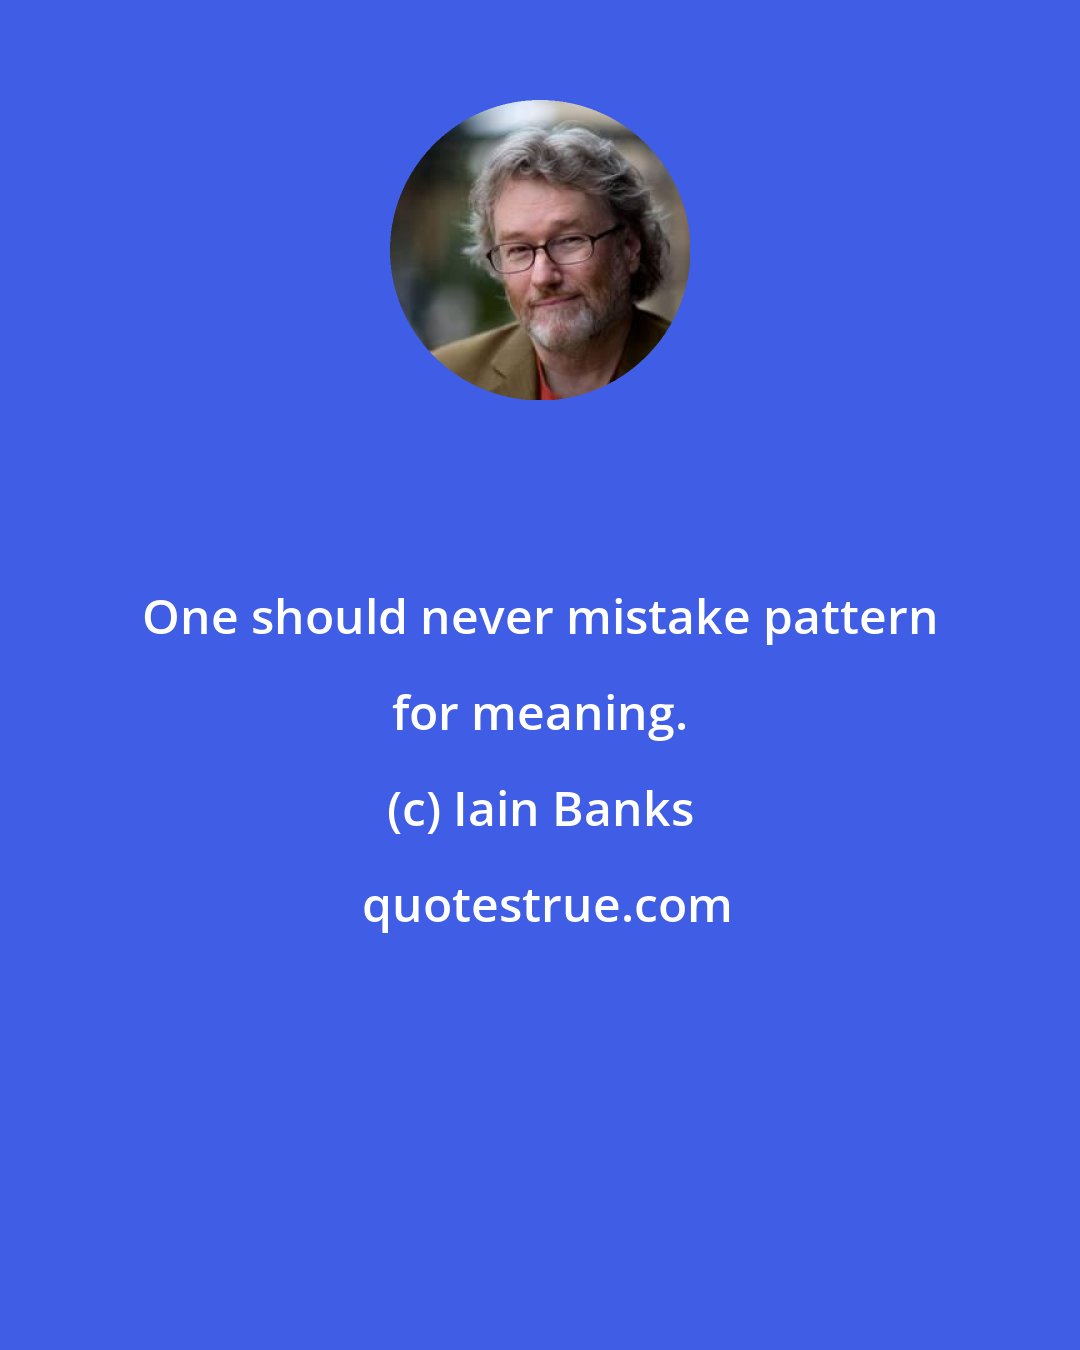 Iain Banks: One should never mistake pattern for meaning.